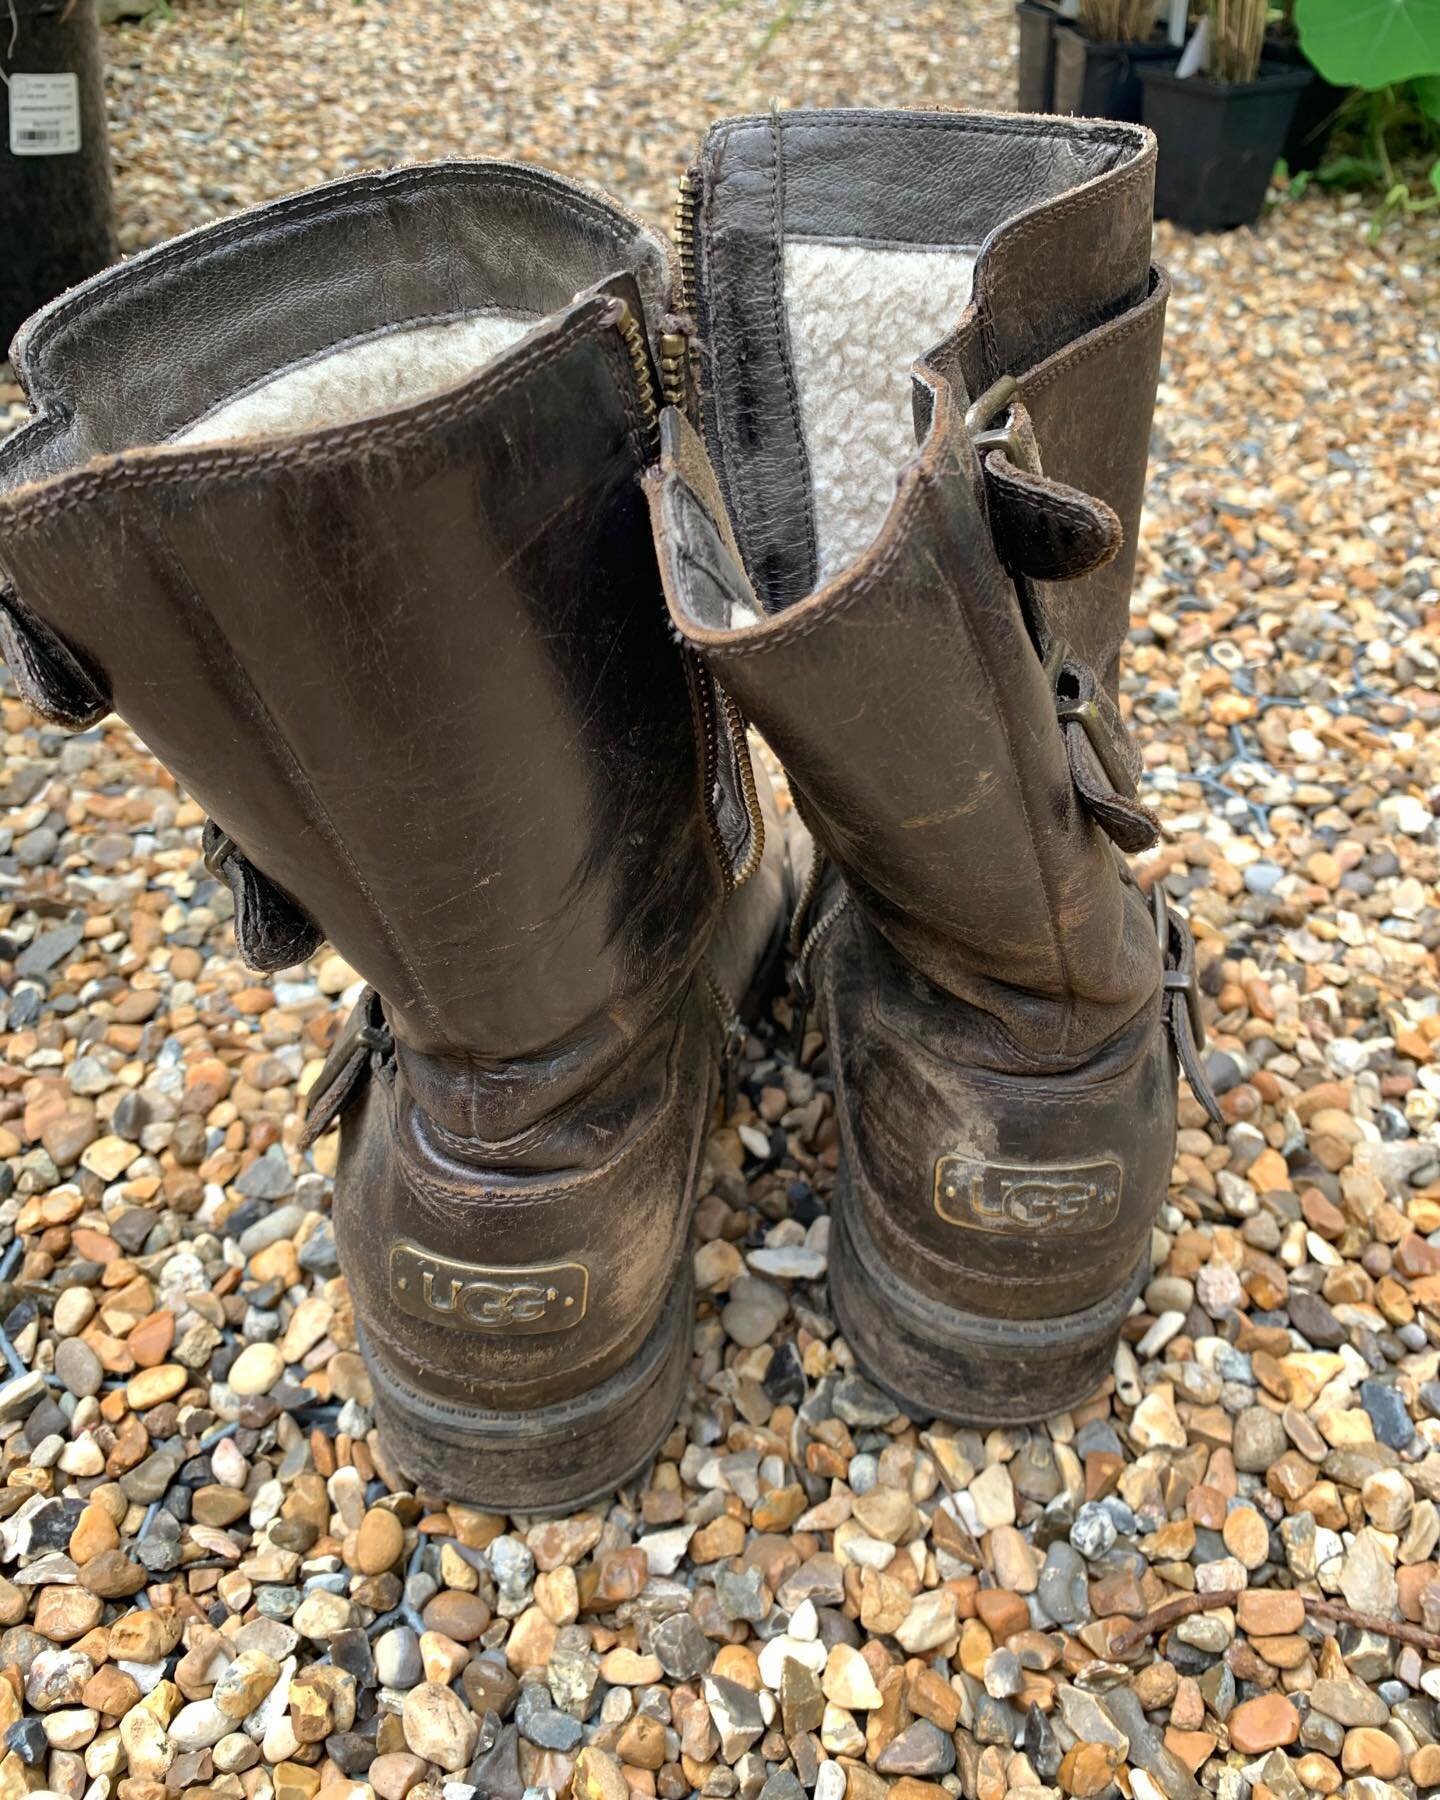 These boots are about to get some Sunday action planting up my Autumn pots.